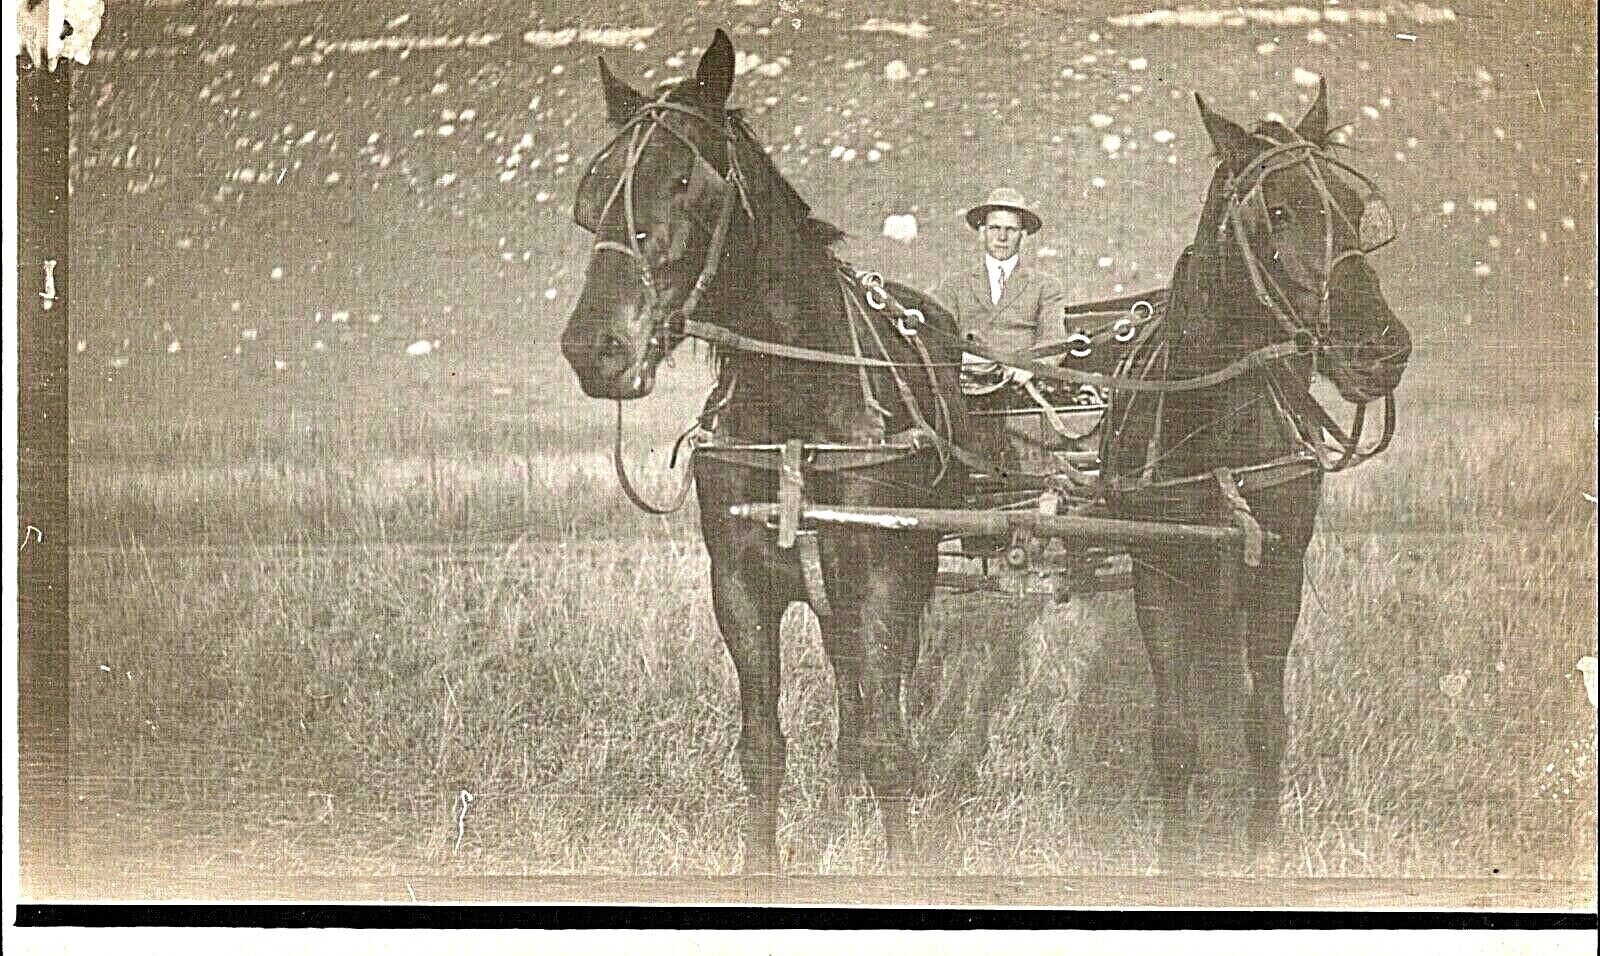 Postcard Man on Buggy,Two Horse Team,Interesting Perspective,Real Photo,1900s